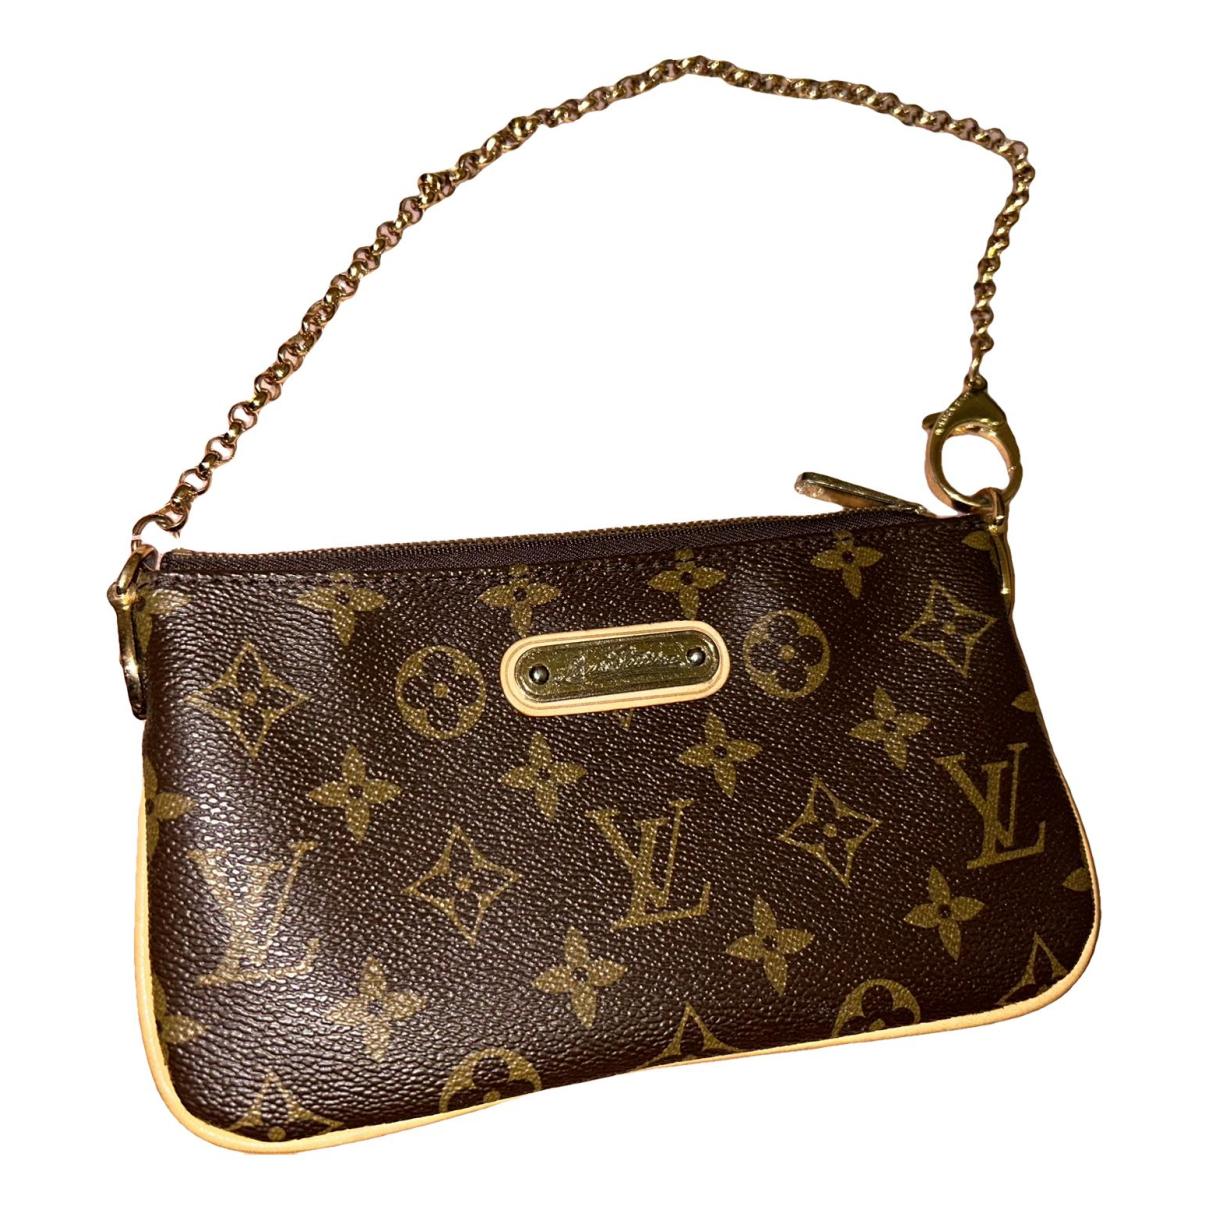 Piscataway: momentum in the US. for Louis Vuitton